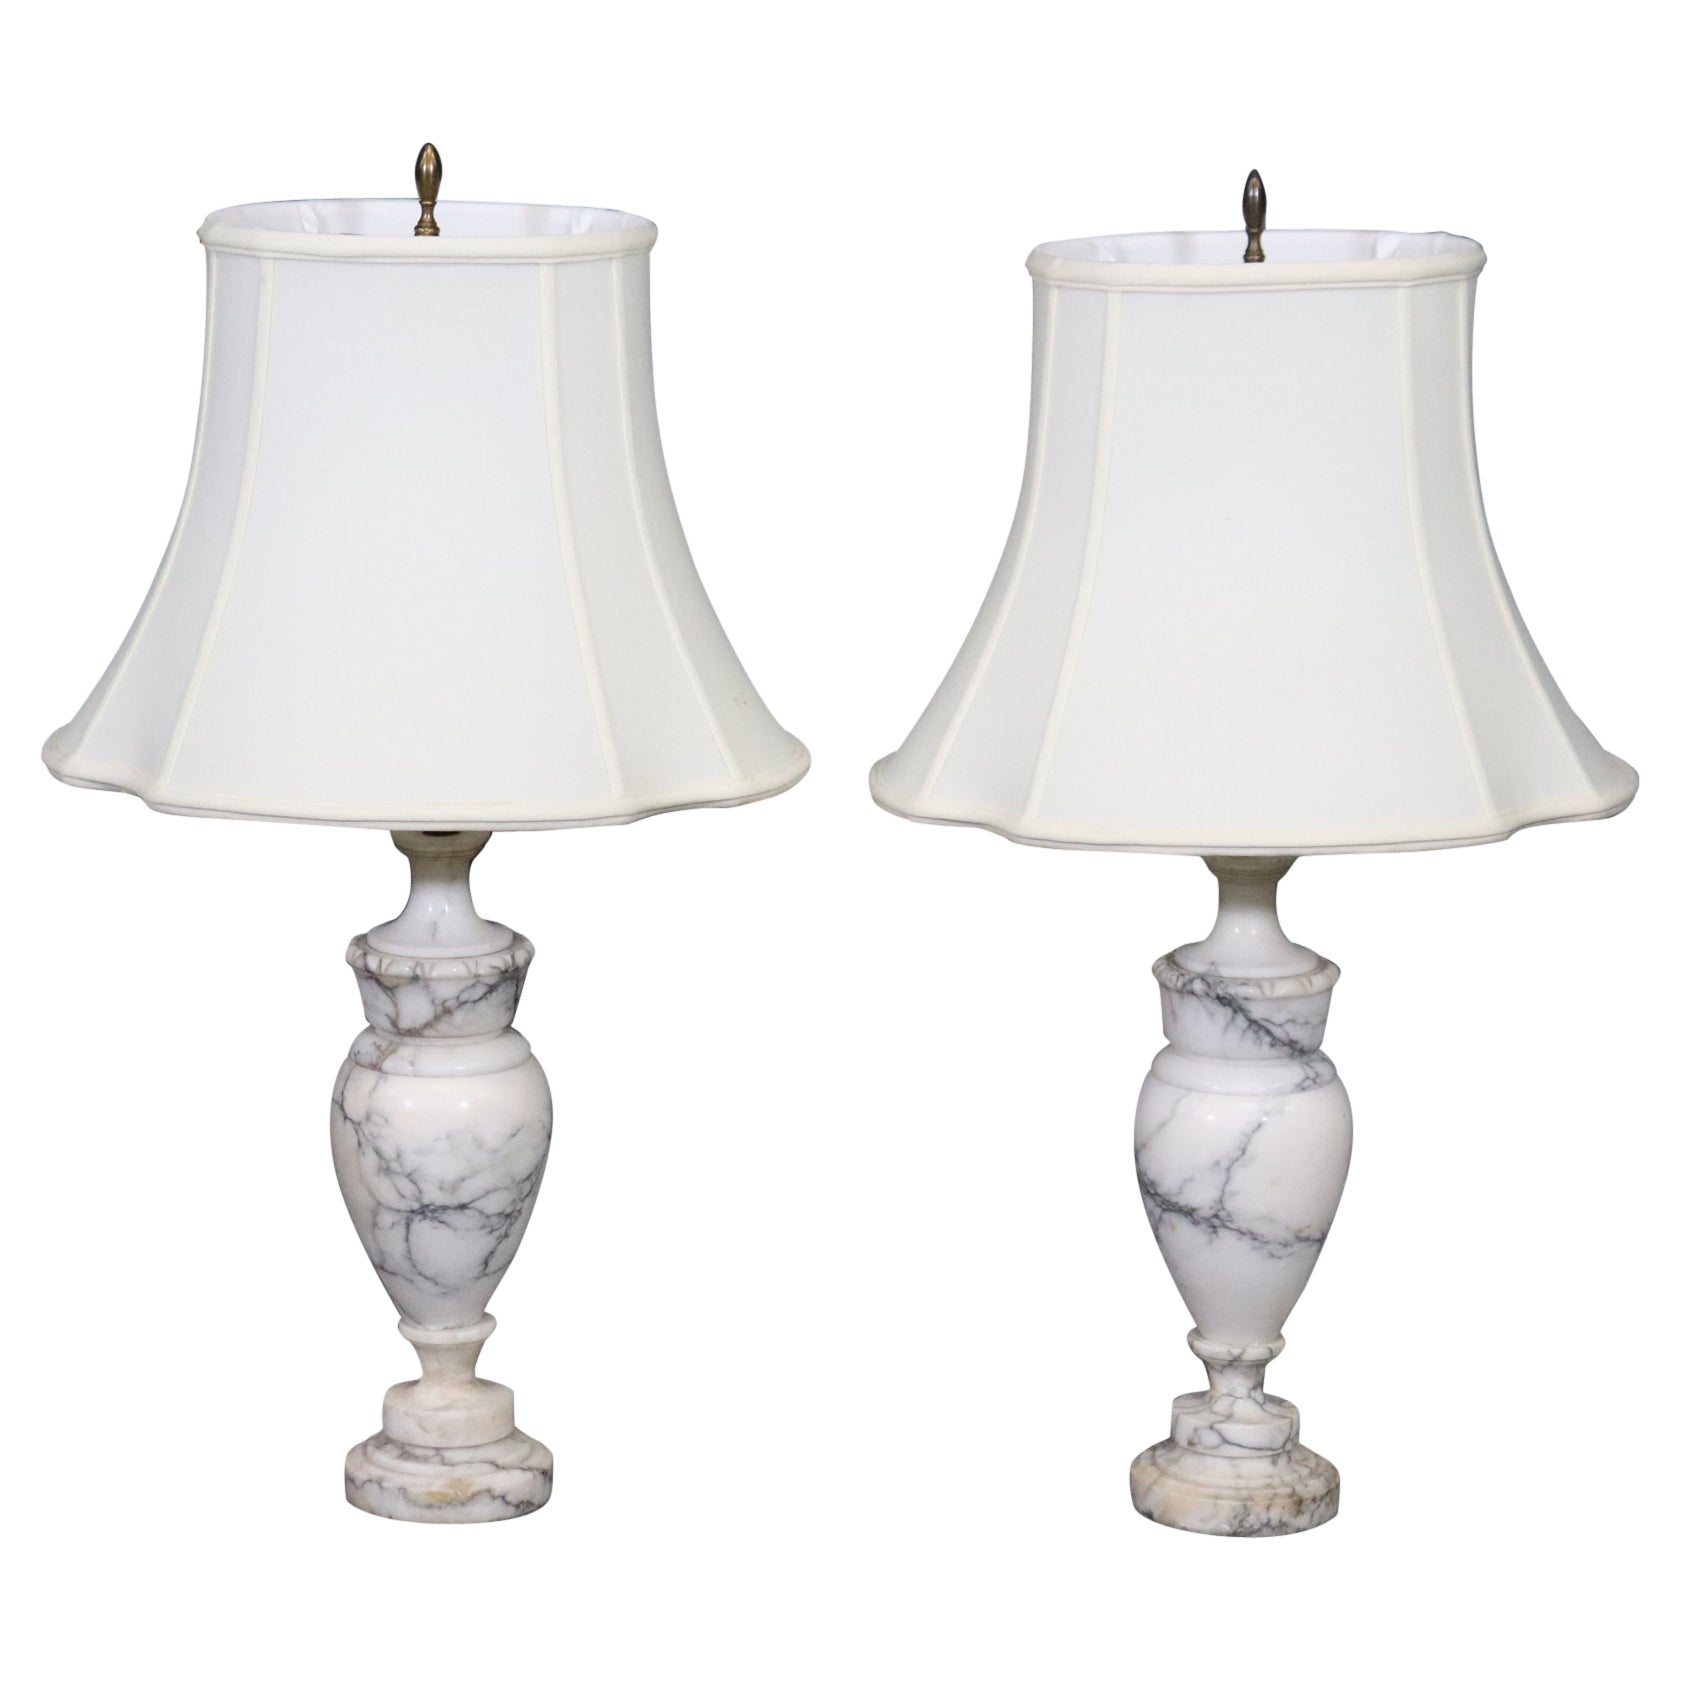 Pair of Italian Grand Tour Style Carrara Marble Table Lamps For Sale